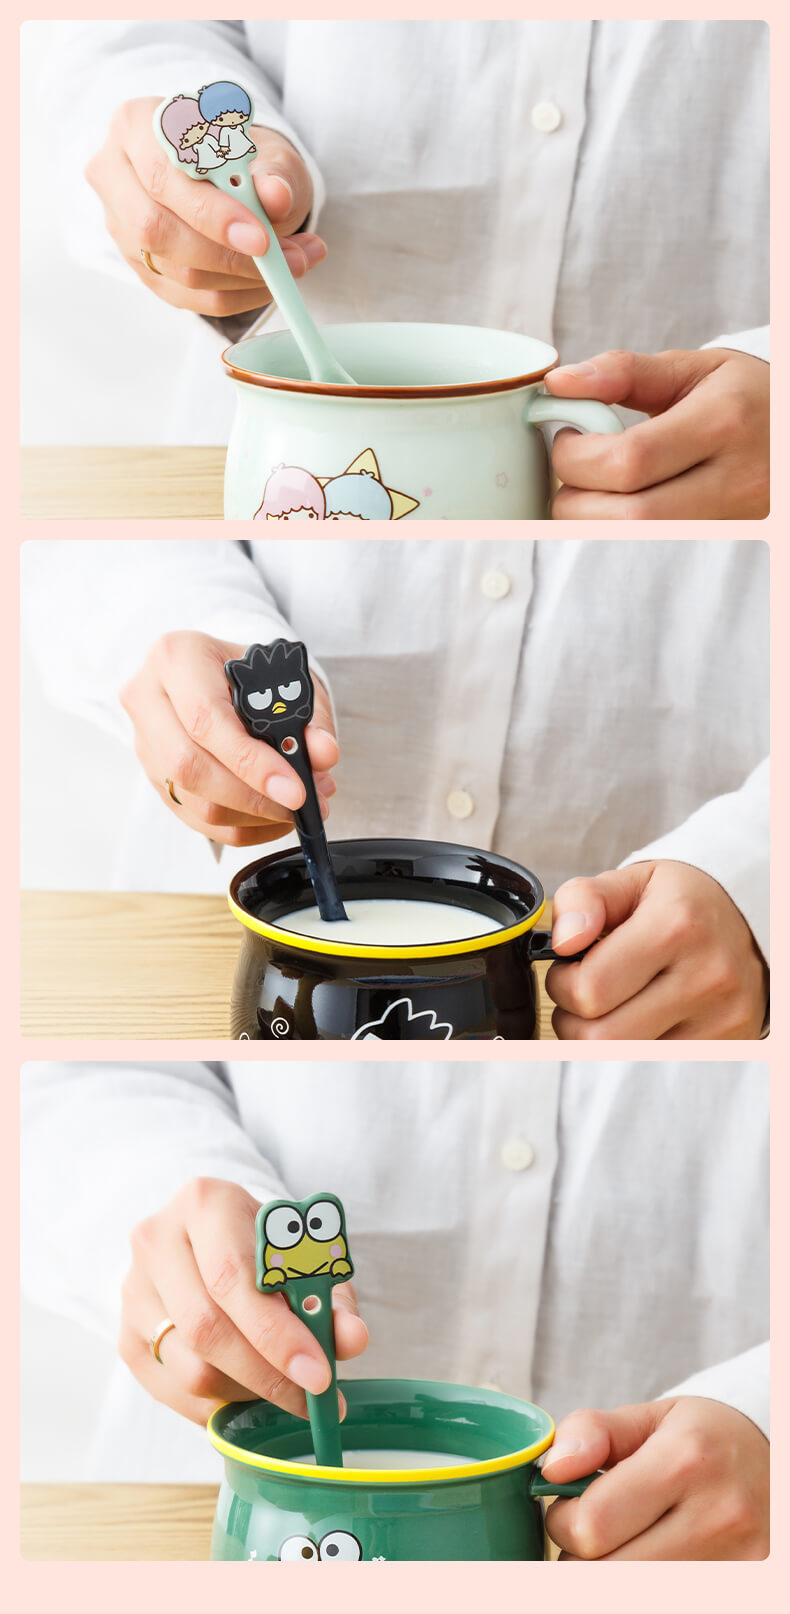 sanrio-character-styling-spoons-matched-with-same-character-mugs